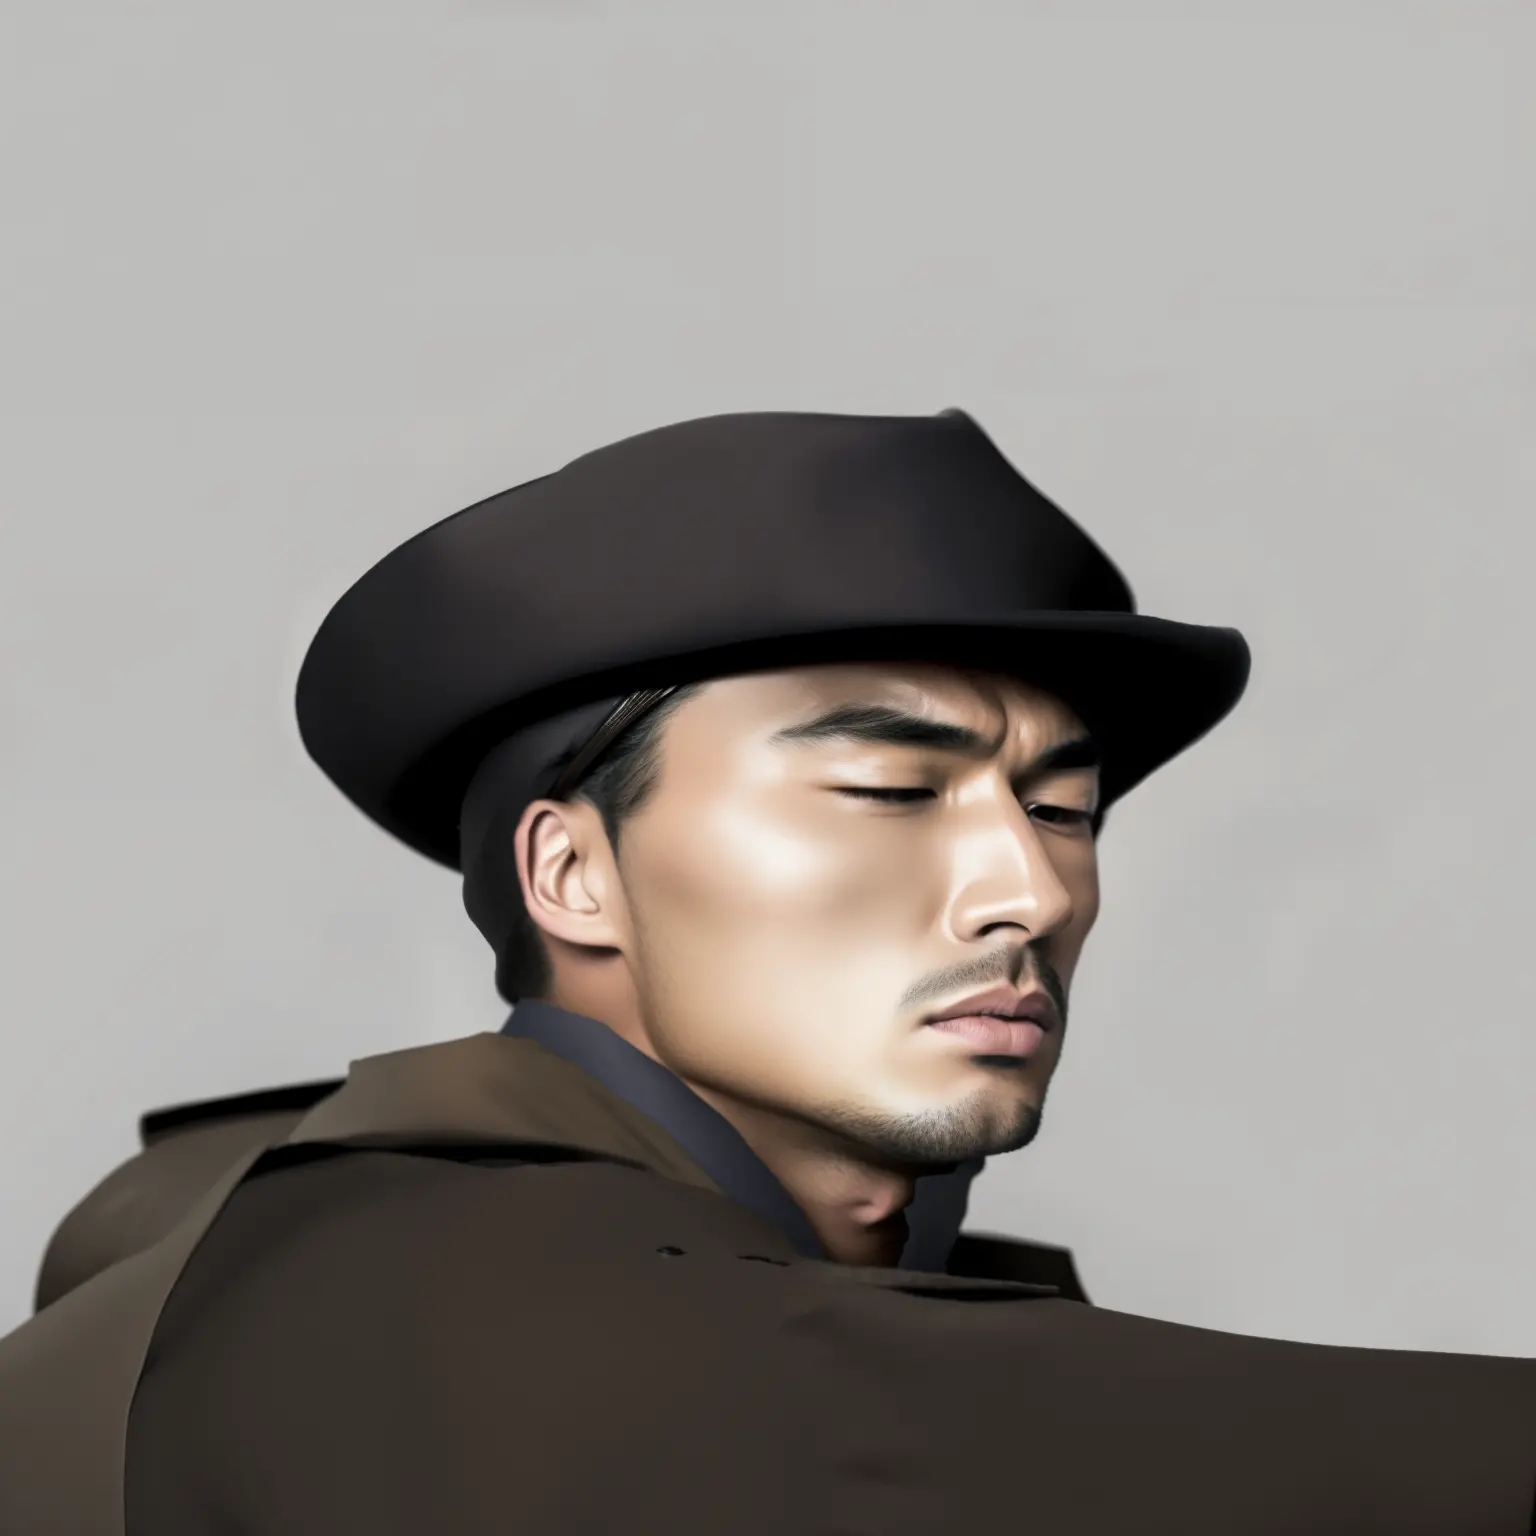 one wearing a hat and coat、Close-up of a man with a gun, Frowning，Eyebrows raised，lips closed，Looks anxious，